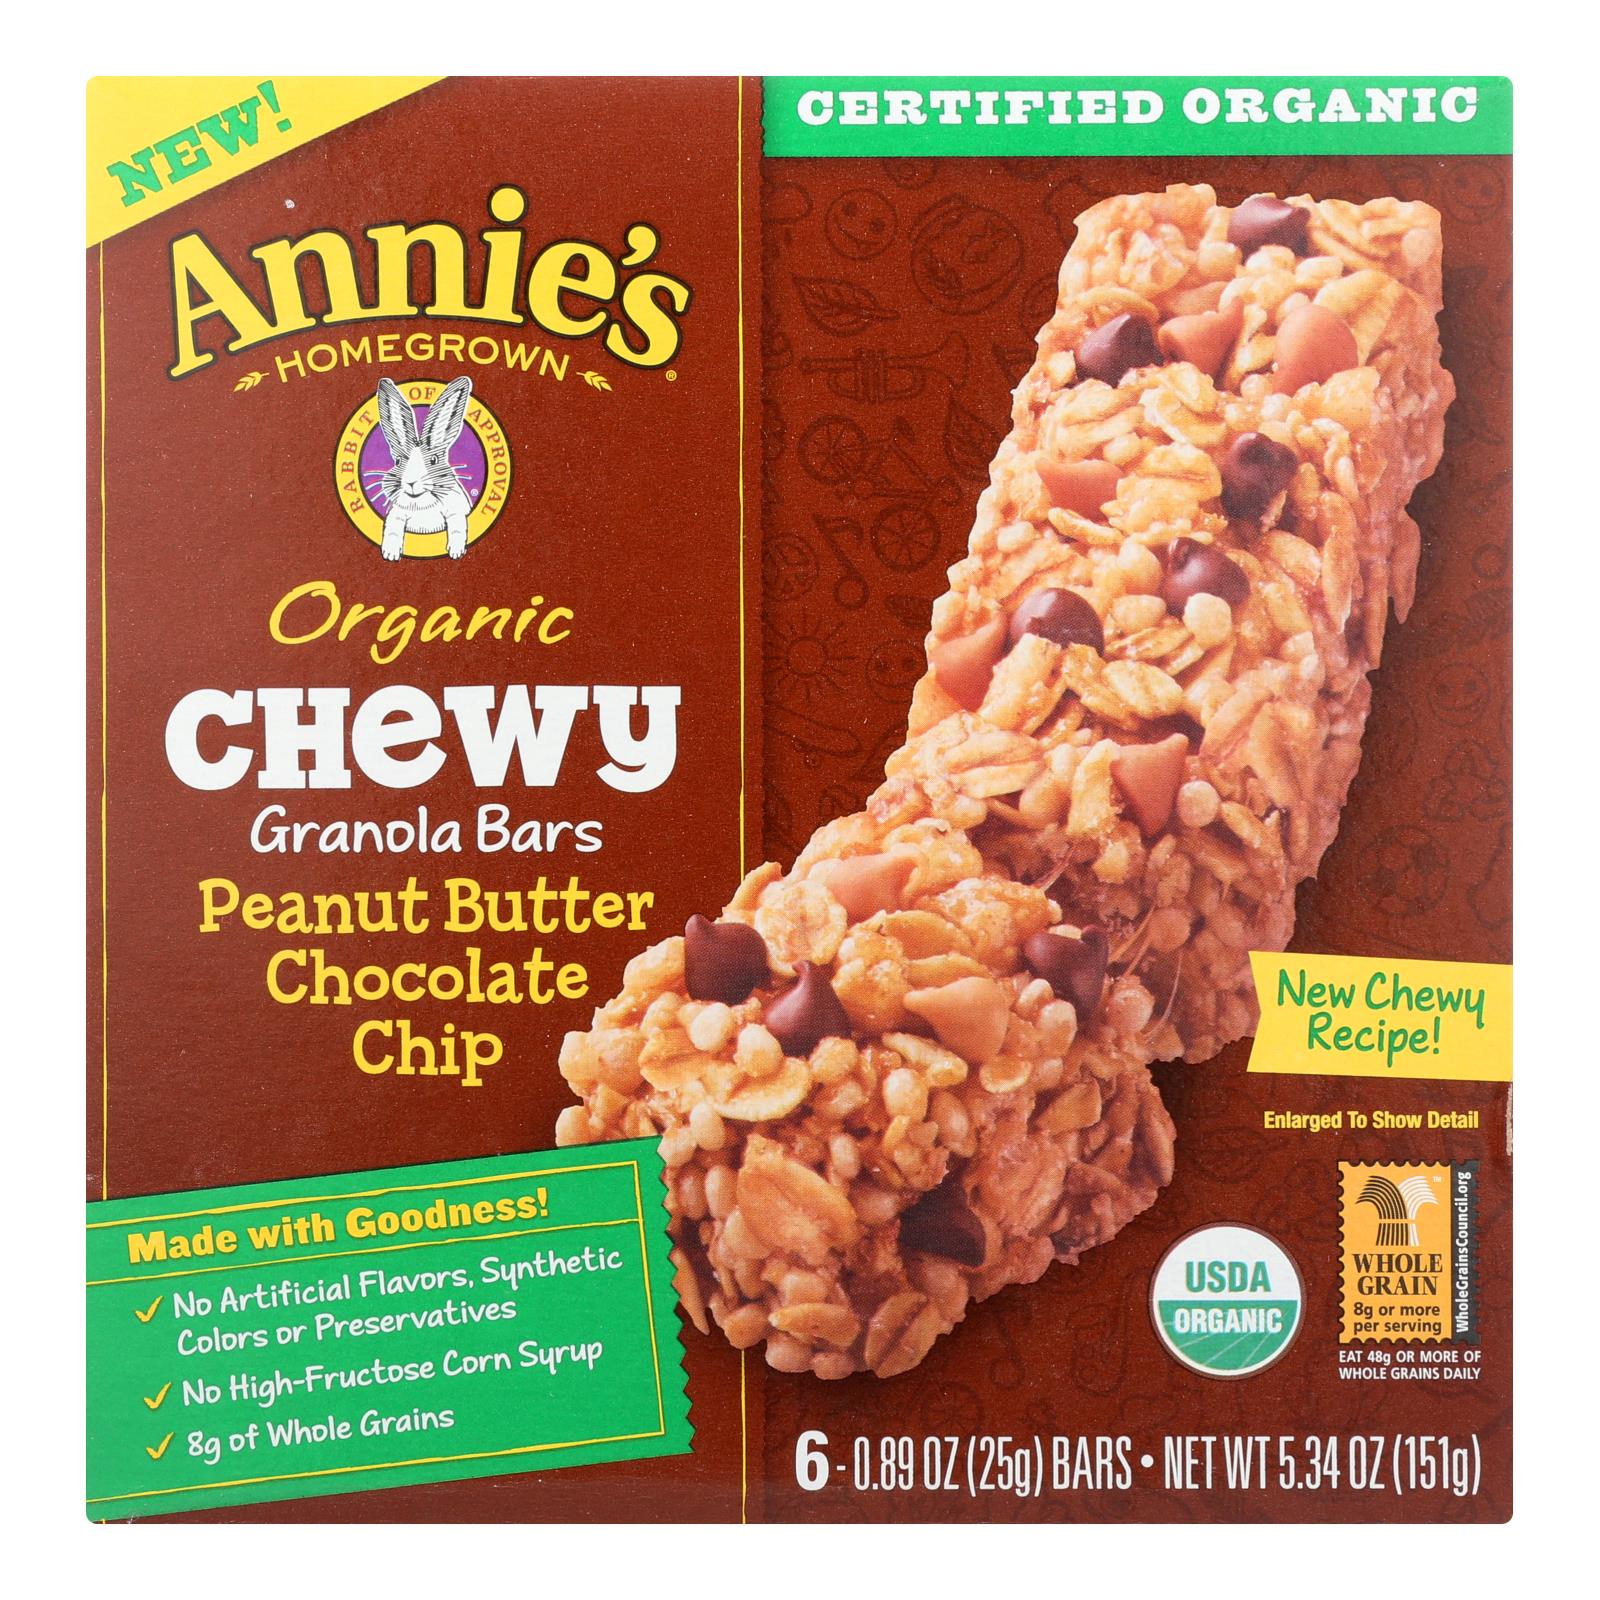 Annie'S Homegrown, Annie's Homegrown Organic Chewy Granola Bars Peanut Butter Chocolate Chip - Case of 12 - 5.34 oz. (Pack of 12)